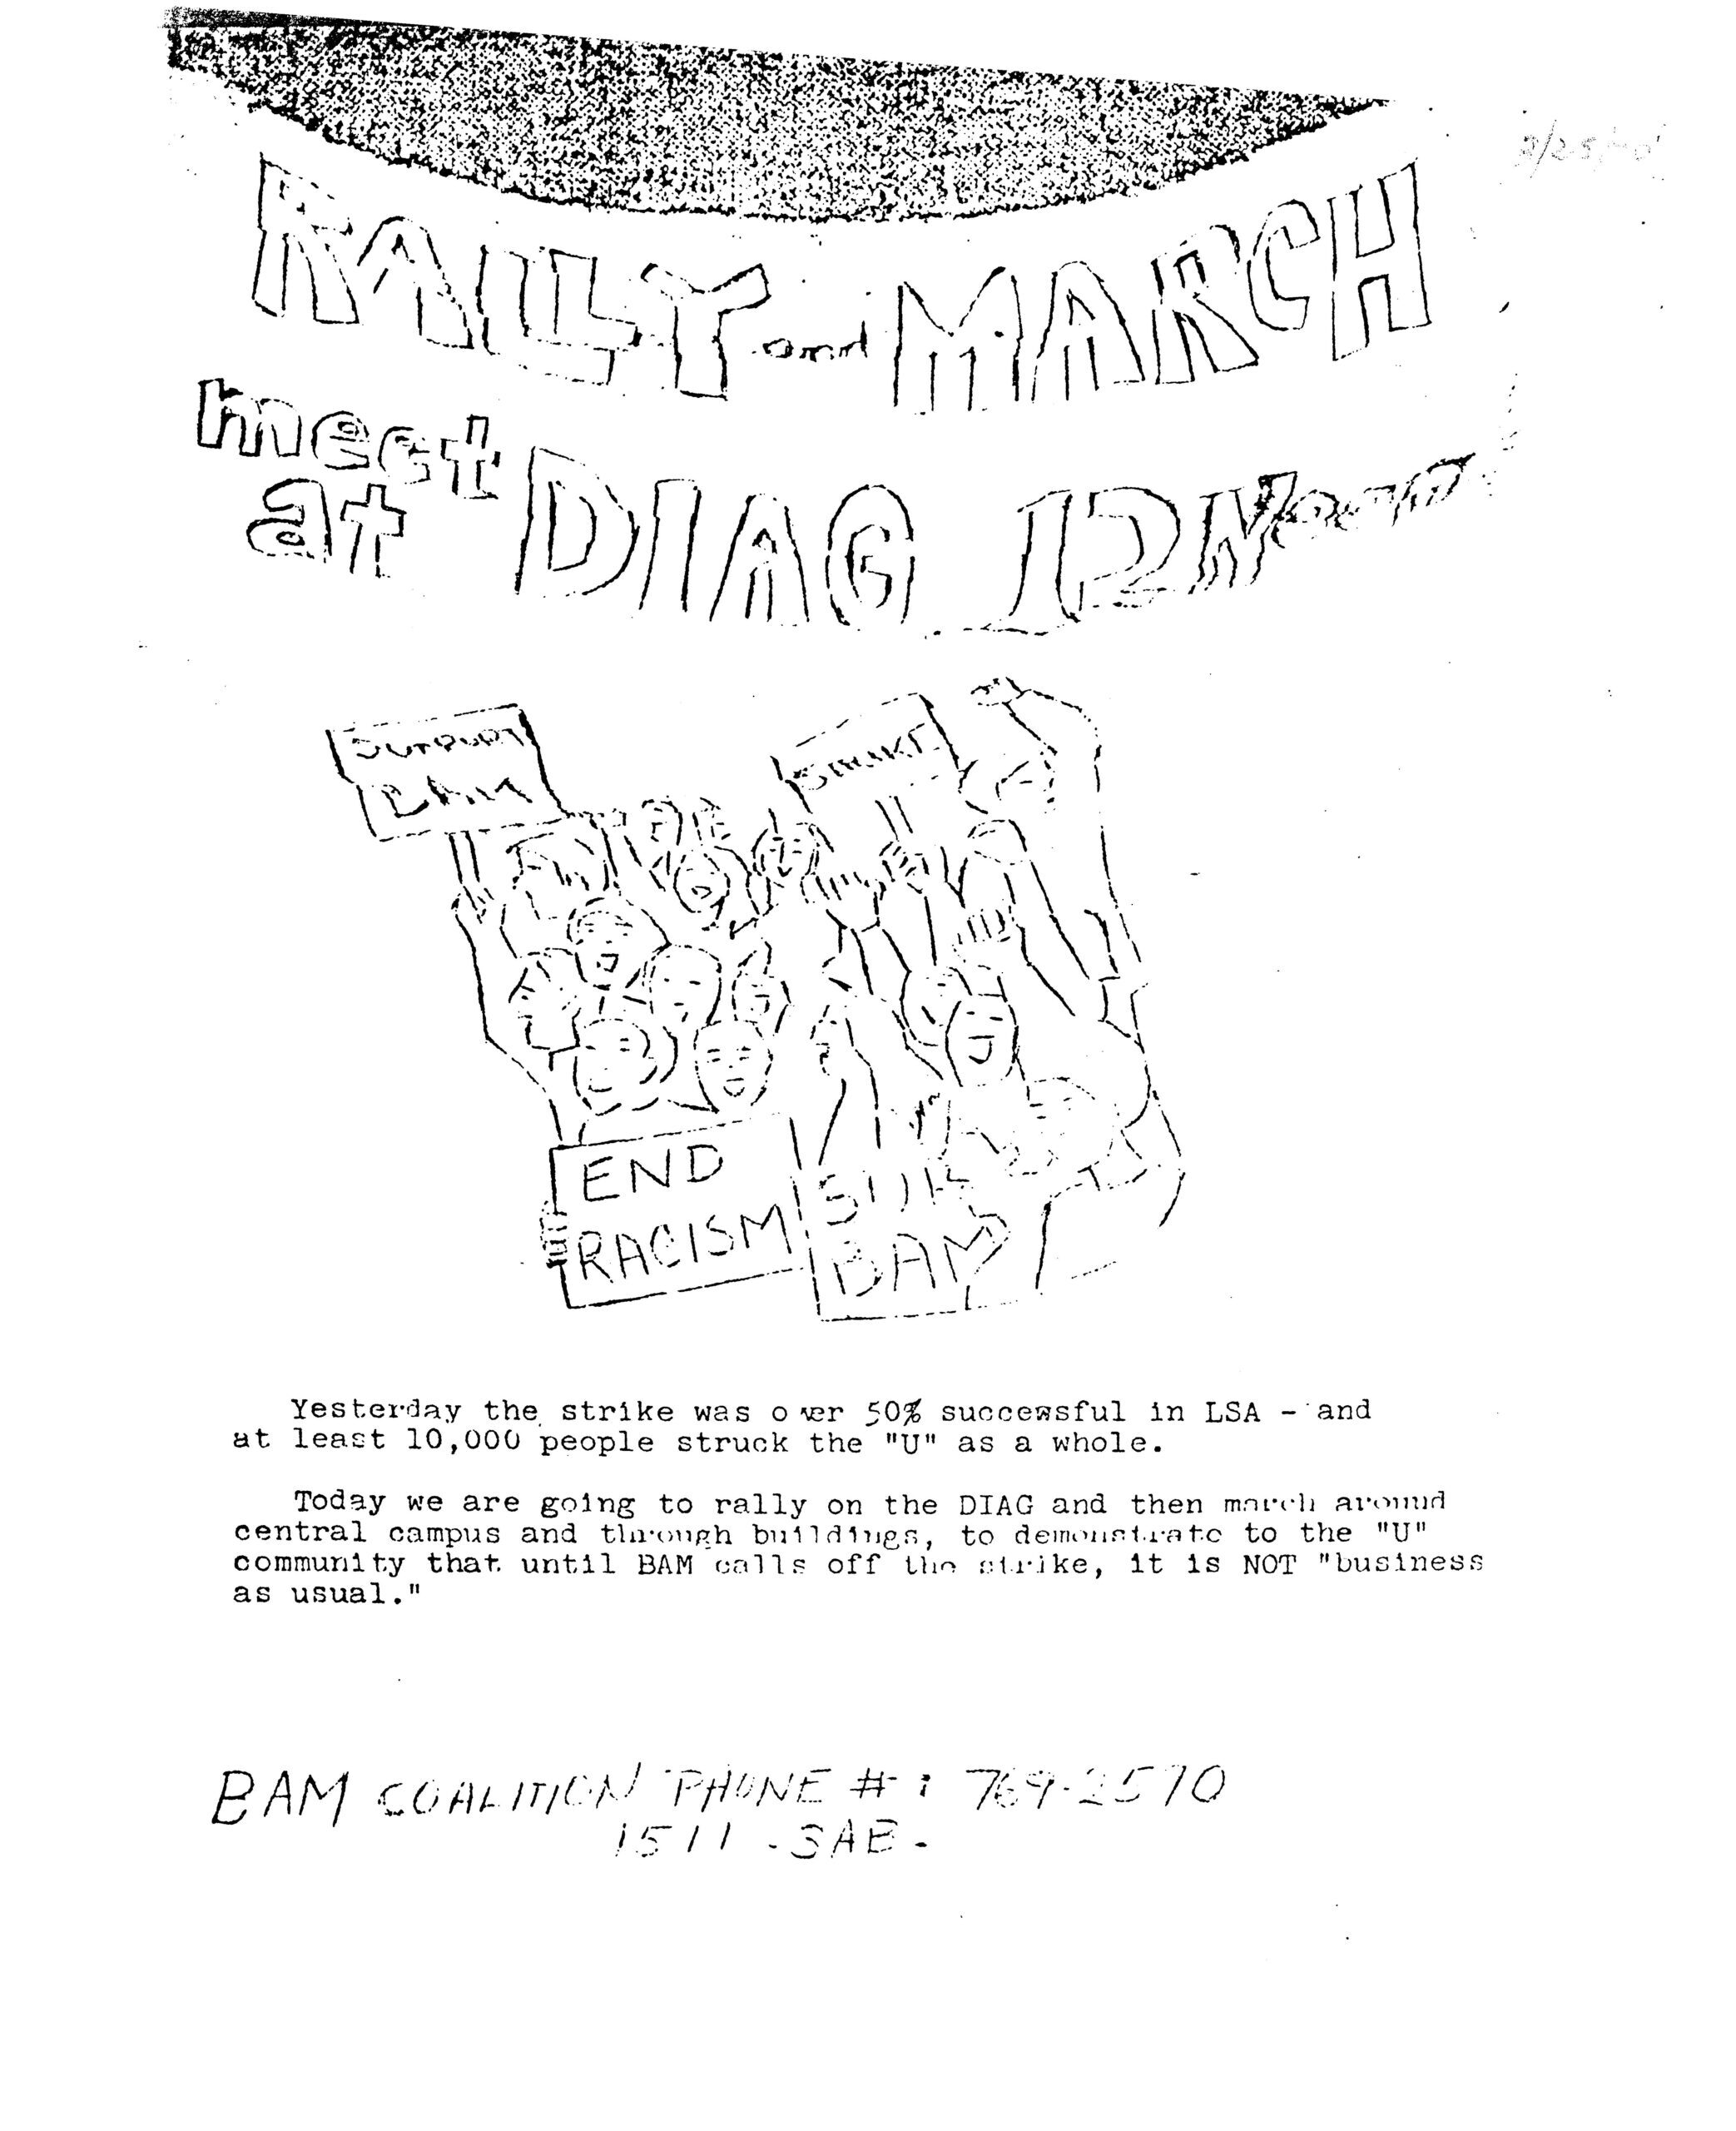 Photocopied flyer with words "Rally and March: Meet at Diag 12 noon," drawing of crowd holding sings that read "Support BAM" and "Strike."